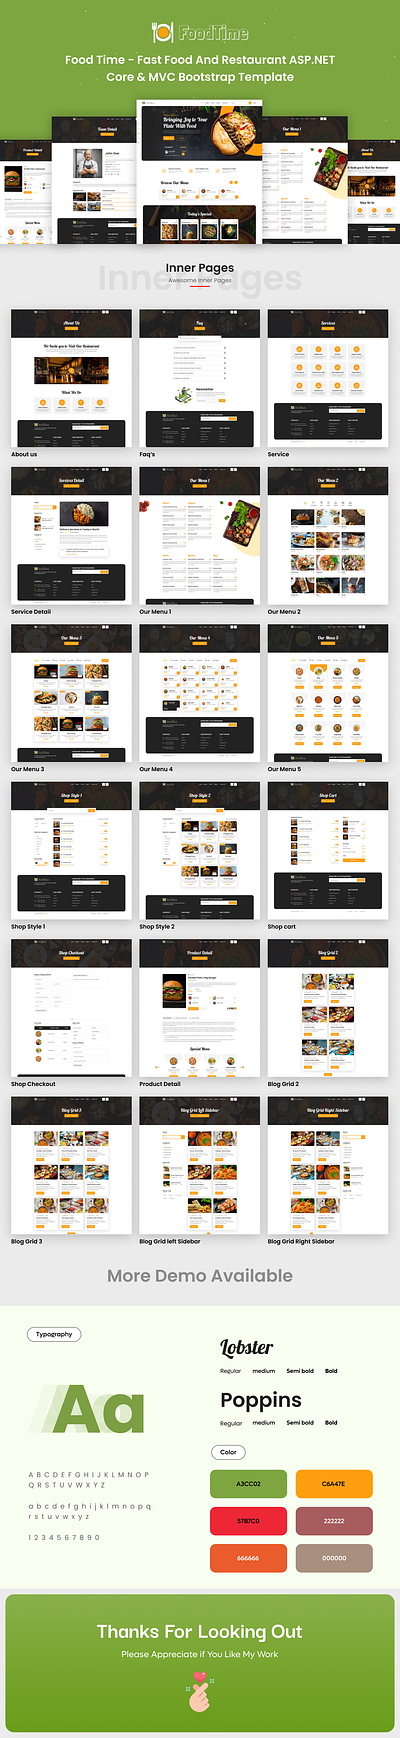 FoodTime - Fast Food And Restaurant ASP.NET Core & MVC Bootstrap asp.net bootstrap creative design dribbble post insta post mobile application motion graphics product design social media post template templates ui uiux user experience user interface web design website